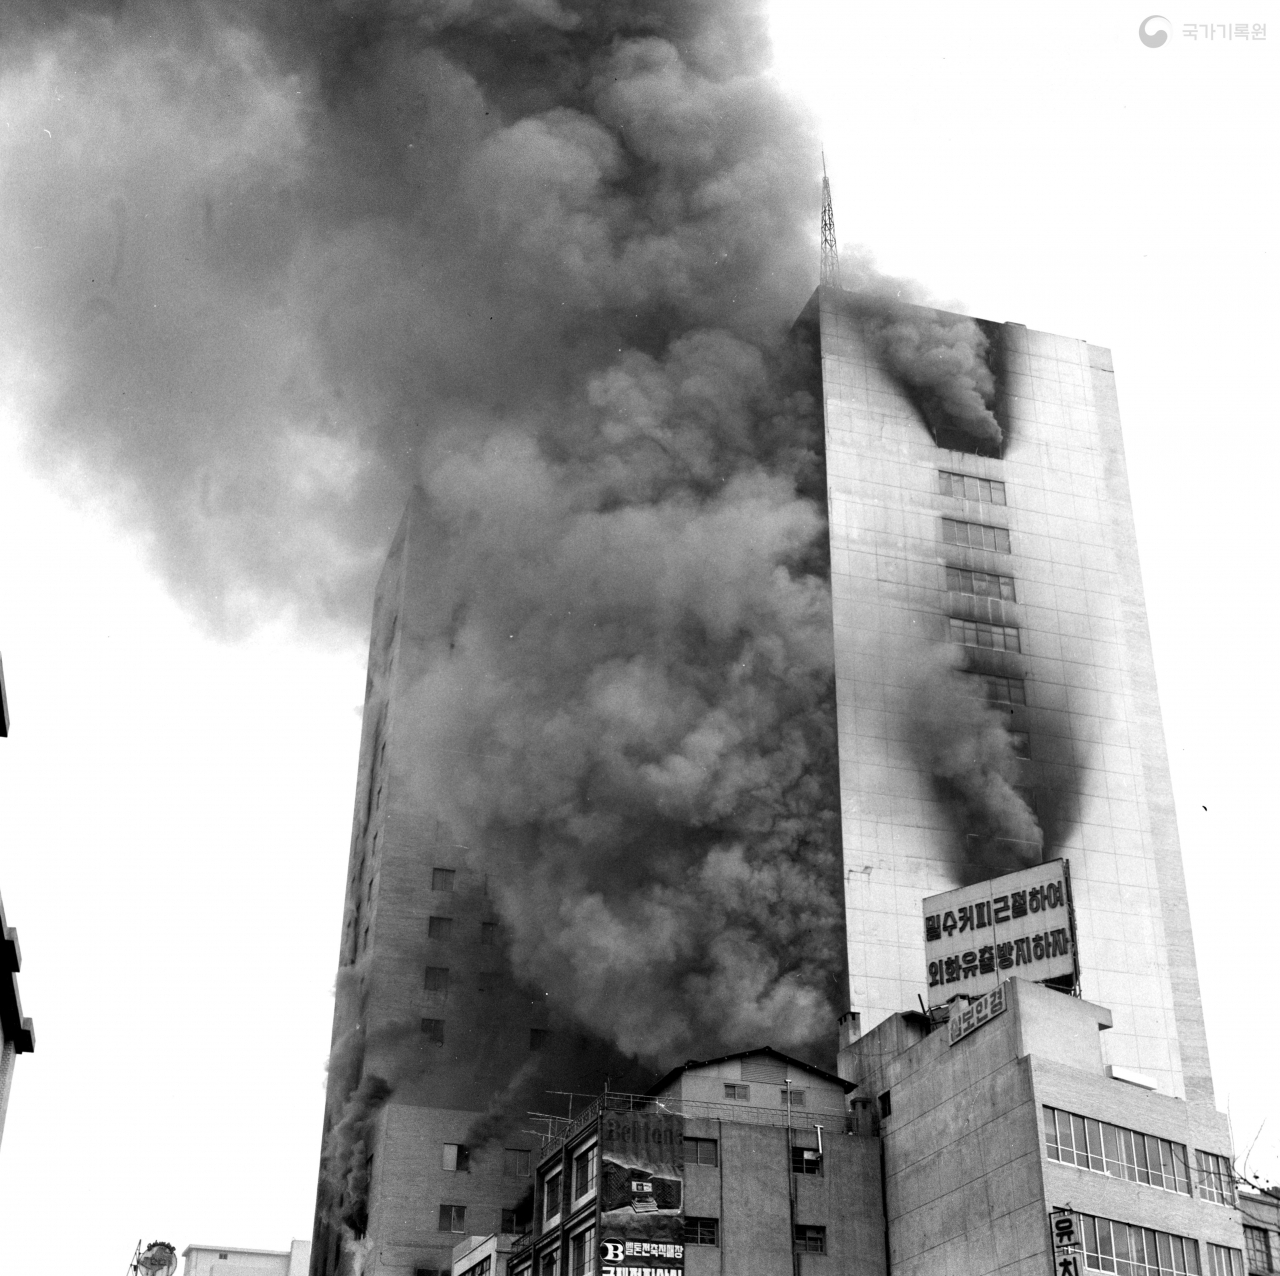 The 21-story Daeyeongak Hotel in Seoul's Chungmuro area is ablaze in this file photo provided by the National Archives of Korea.